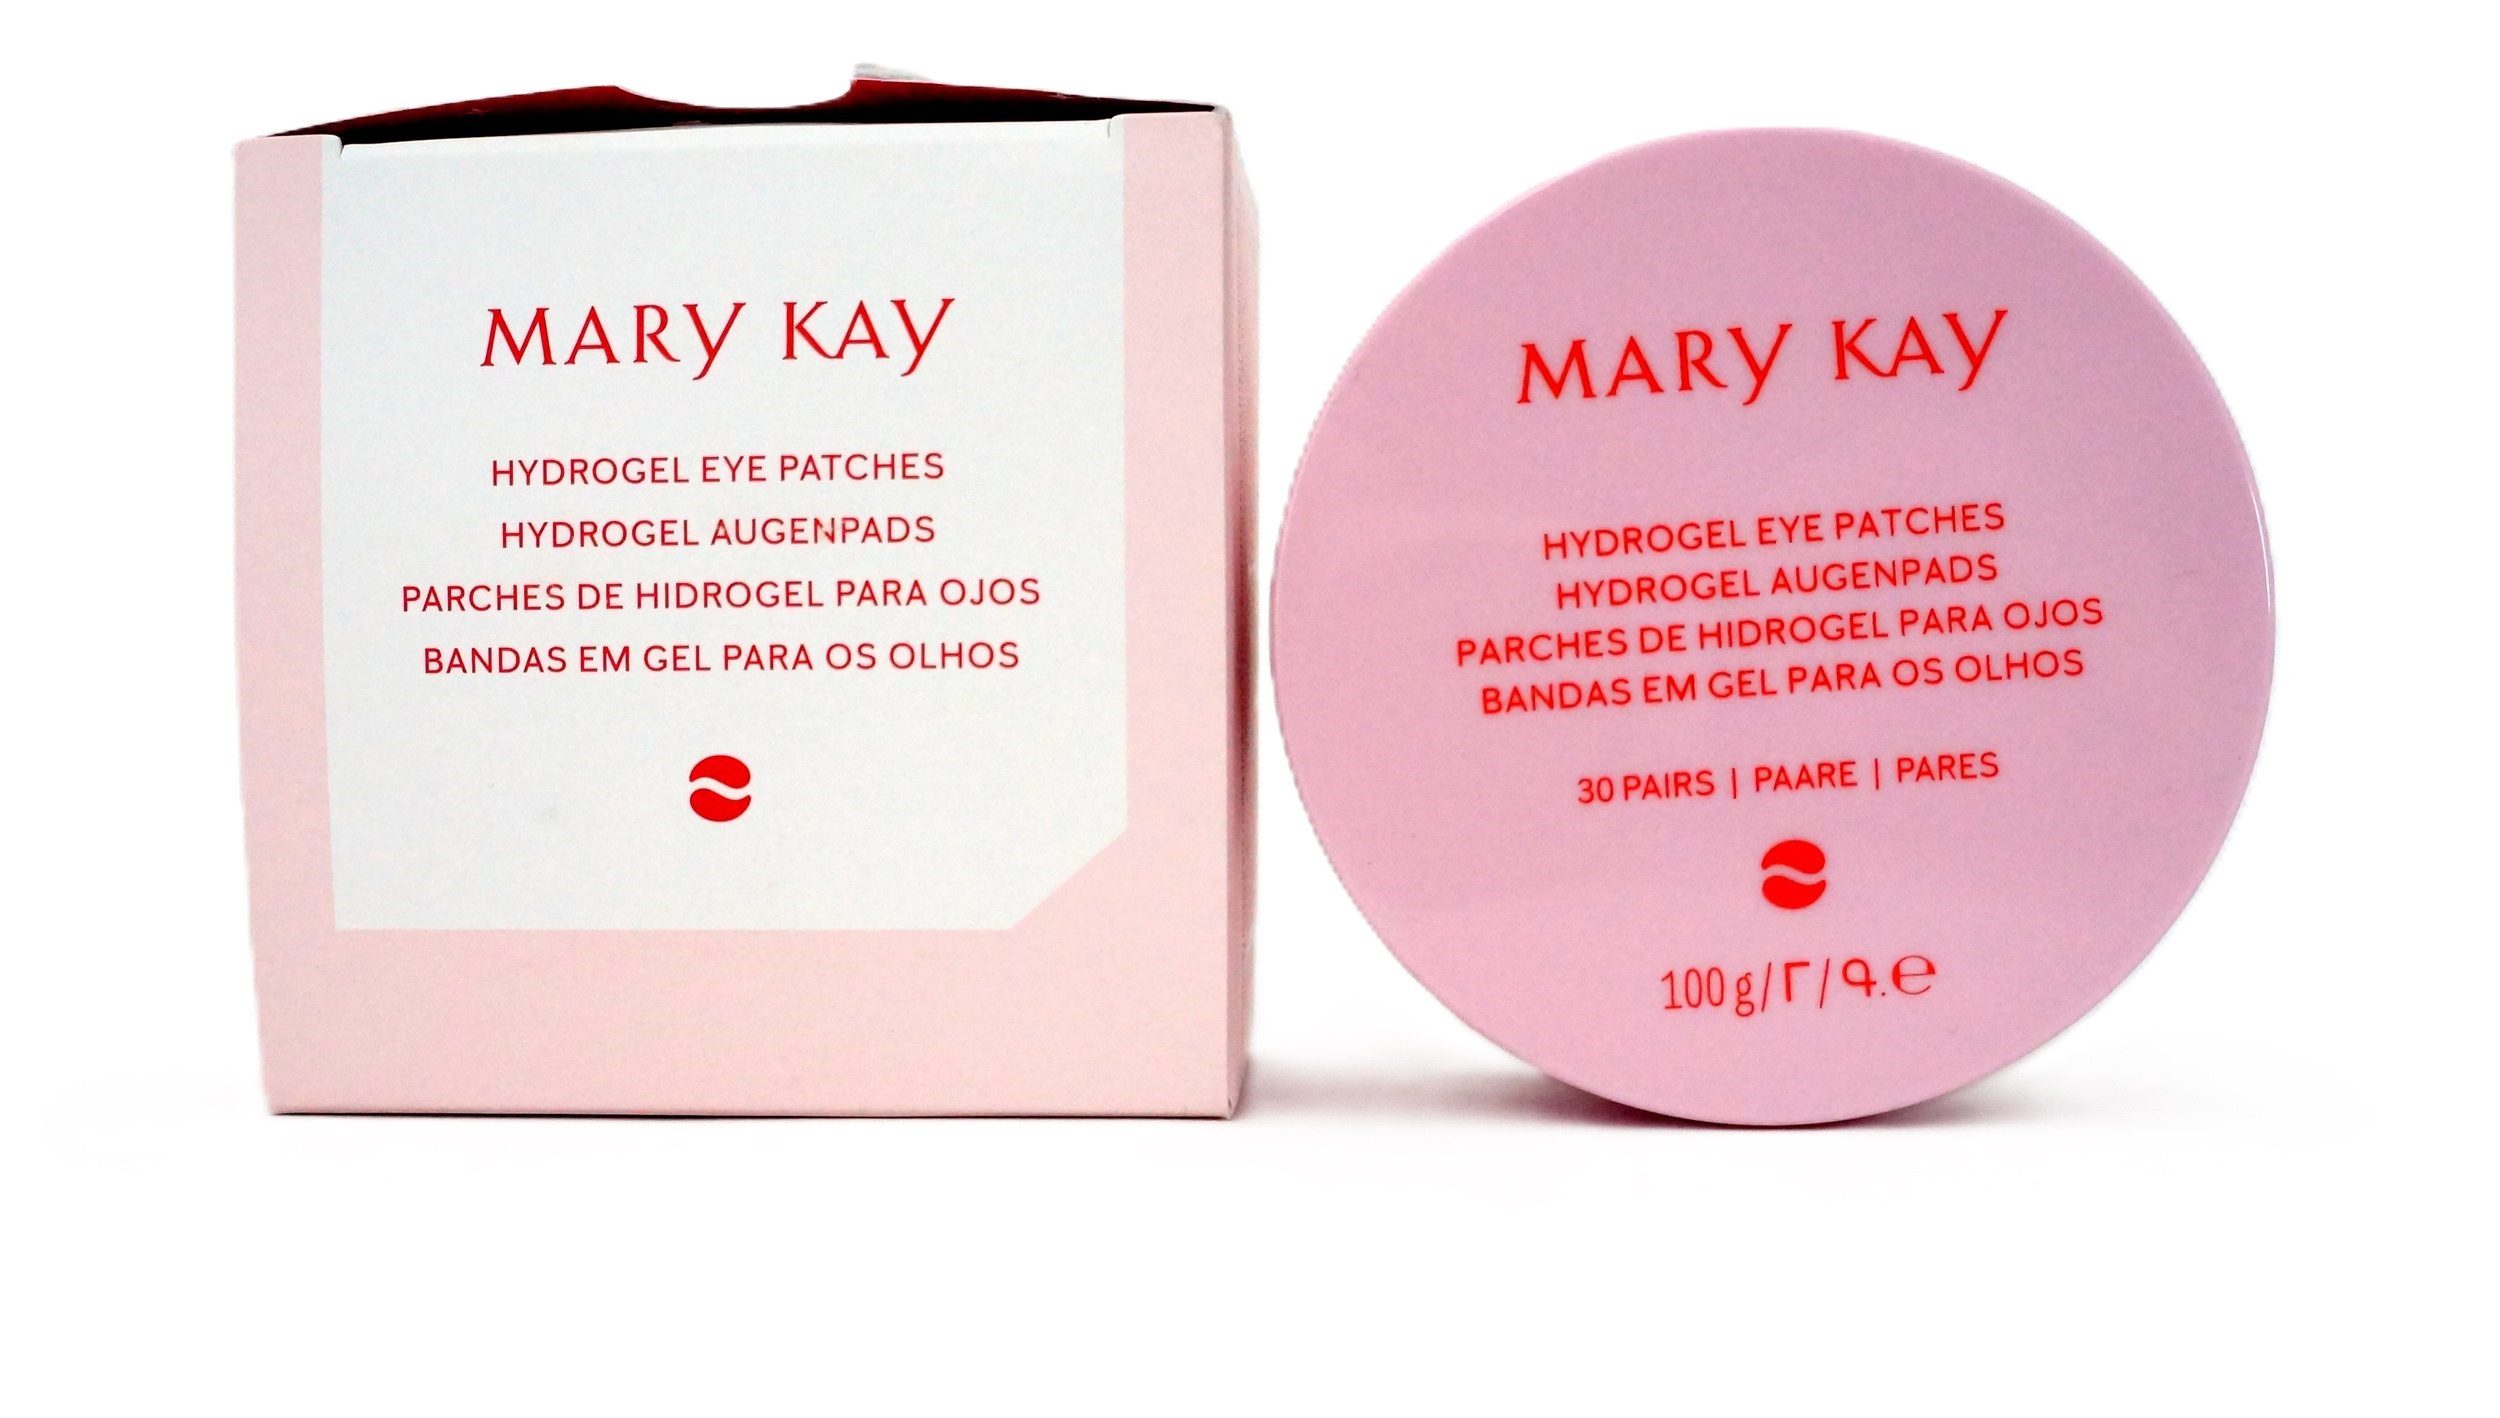 Mary Kay Augenpads Hydrogel Eye Patches Augenpads 30 pairs - Paare 100 gr